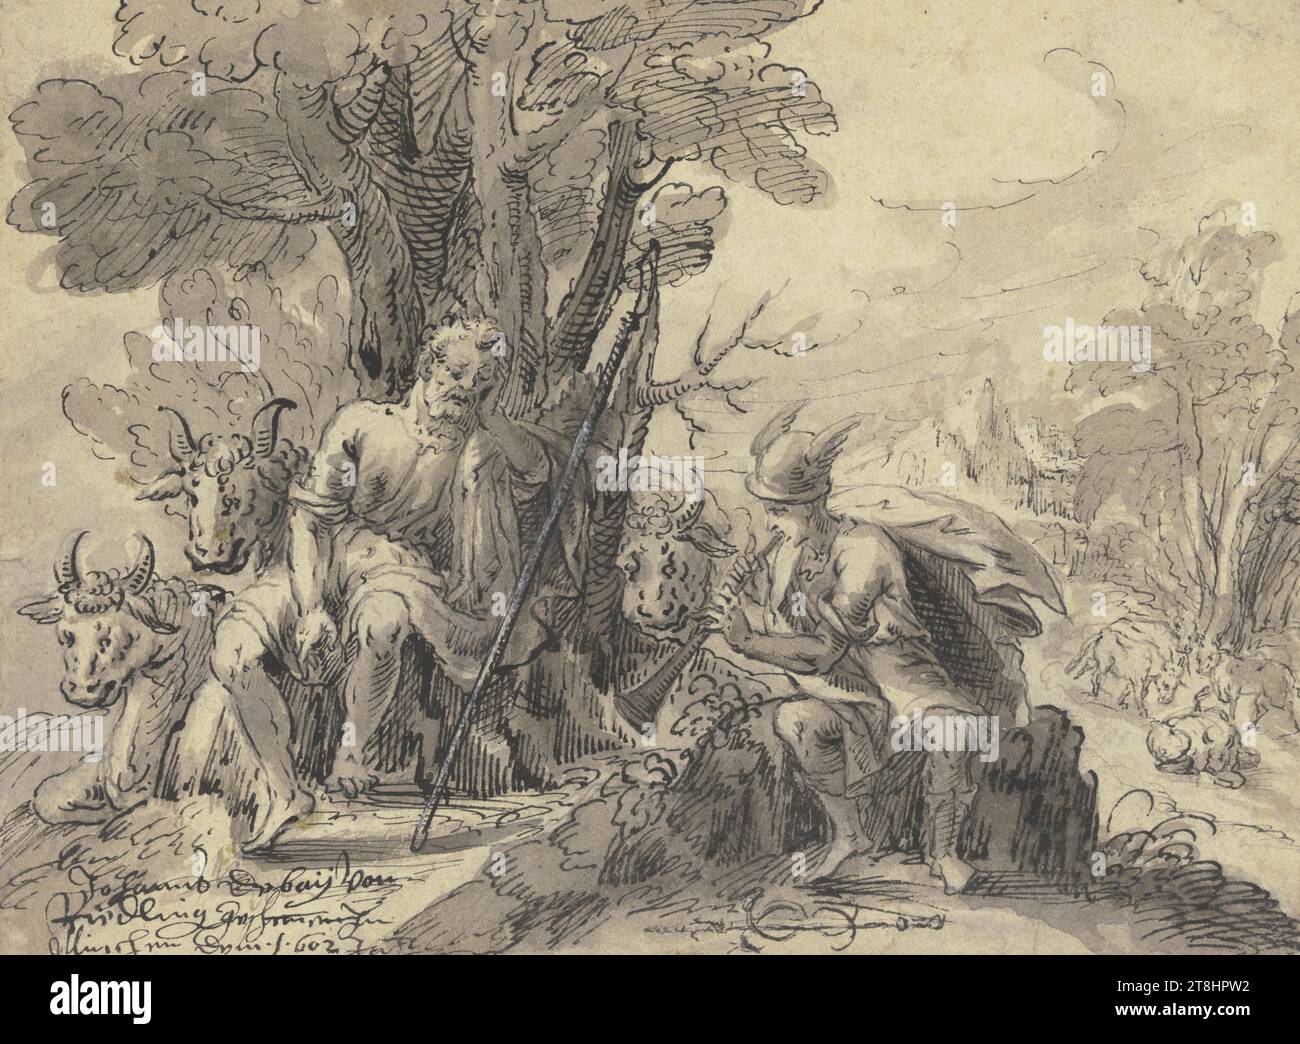 HANS DEPAY, Argus sitting with his flock under a tree, 1602, sheet, 144 x 195 mm, pen in black and brush in gray on vergé paper, Argus sitting with his flock under a tree, HANS DEPAY, 17TH CENTURY, LATE RENAISSANCE, DRAWING, pen in black and brush in gray on vergé paper, INK?, INK?, INK PAPER, PEN DRAWING, BRUSH DRAWING, GERMAN, COMPOSITION STUDY, Signed, dated and inscribed lower left, with the pen in black, Johannes Debay by / Riedling given to / Munich 1602 year Stock Photo